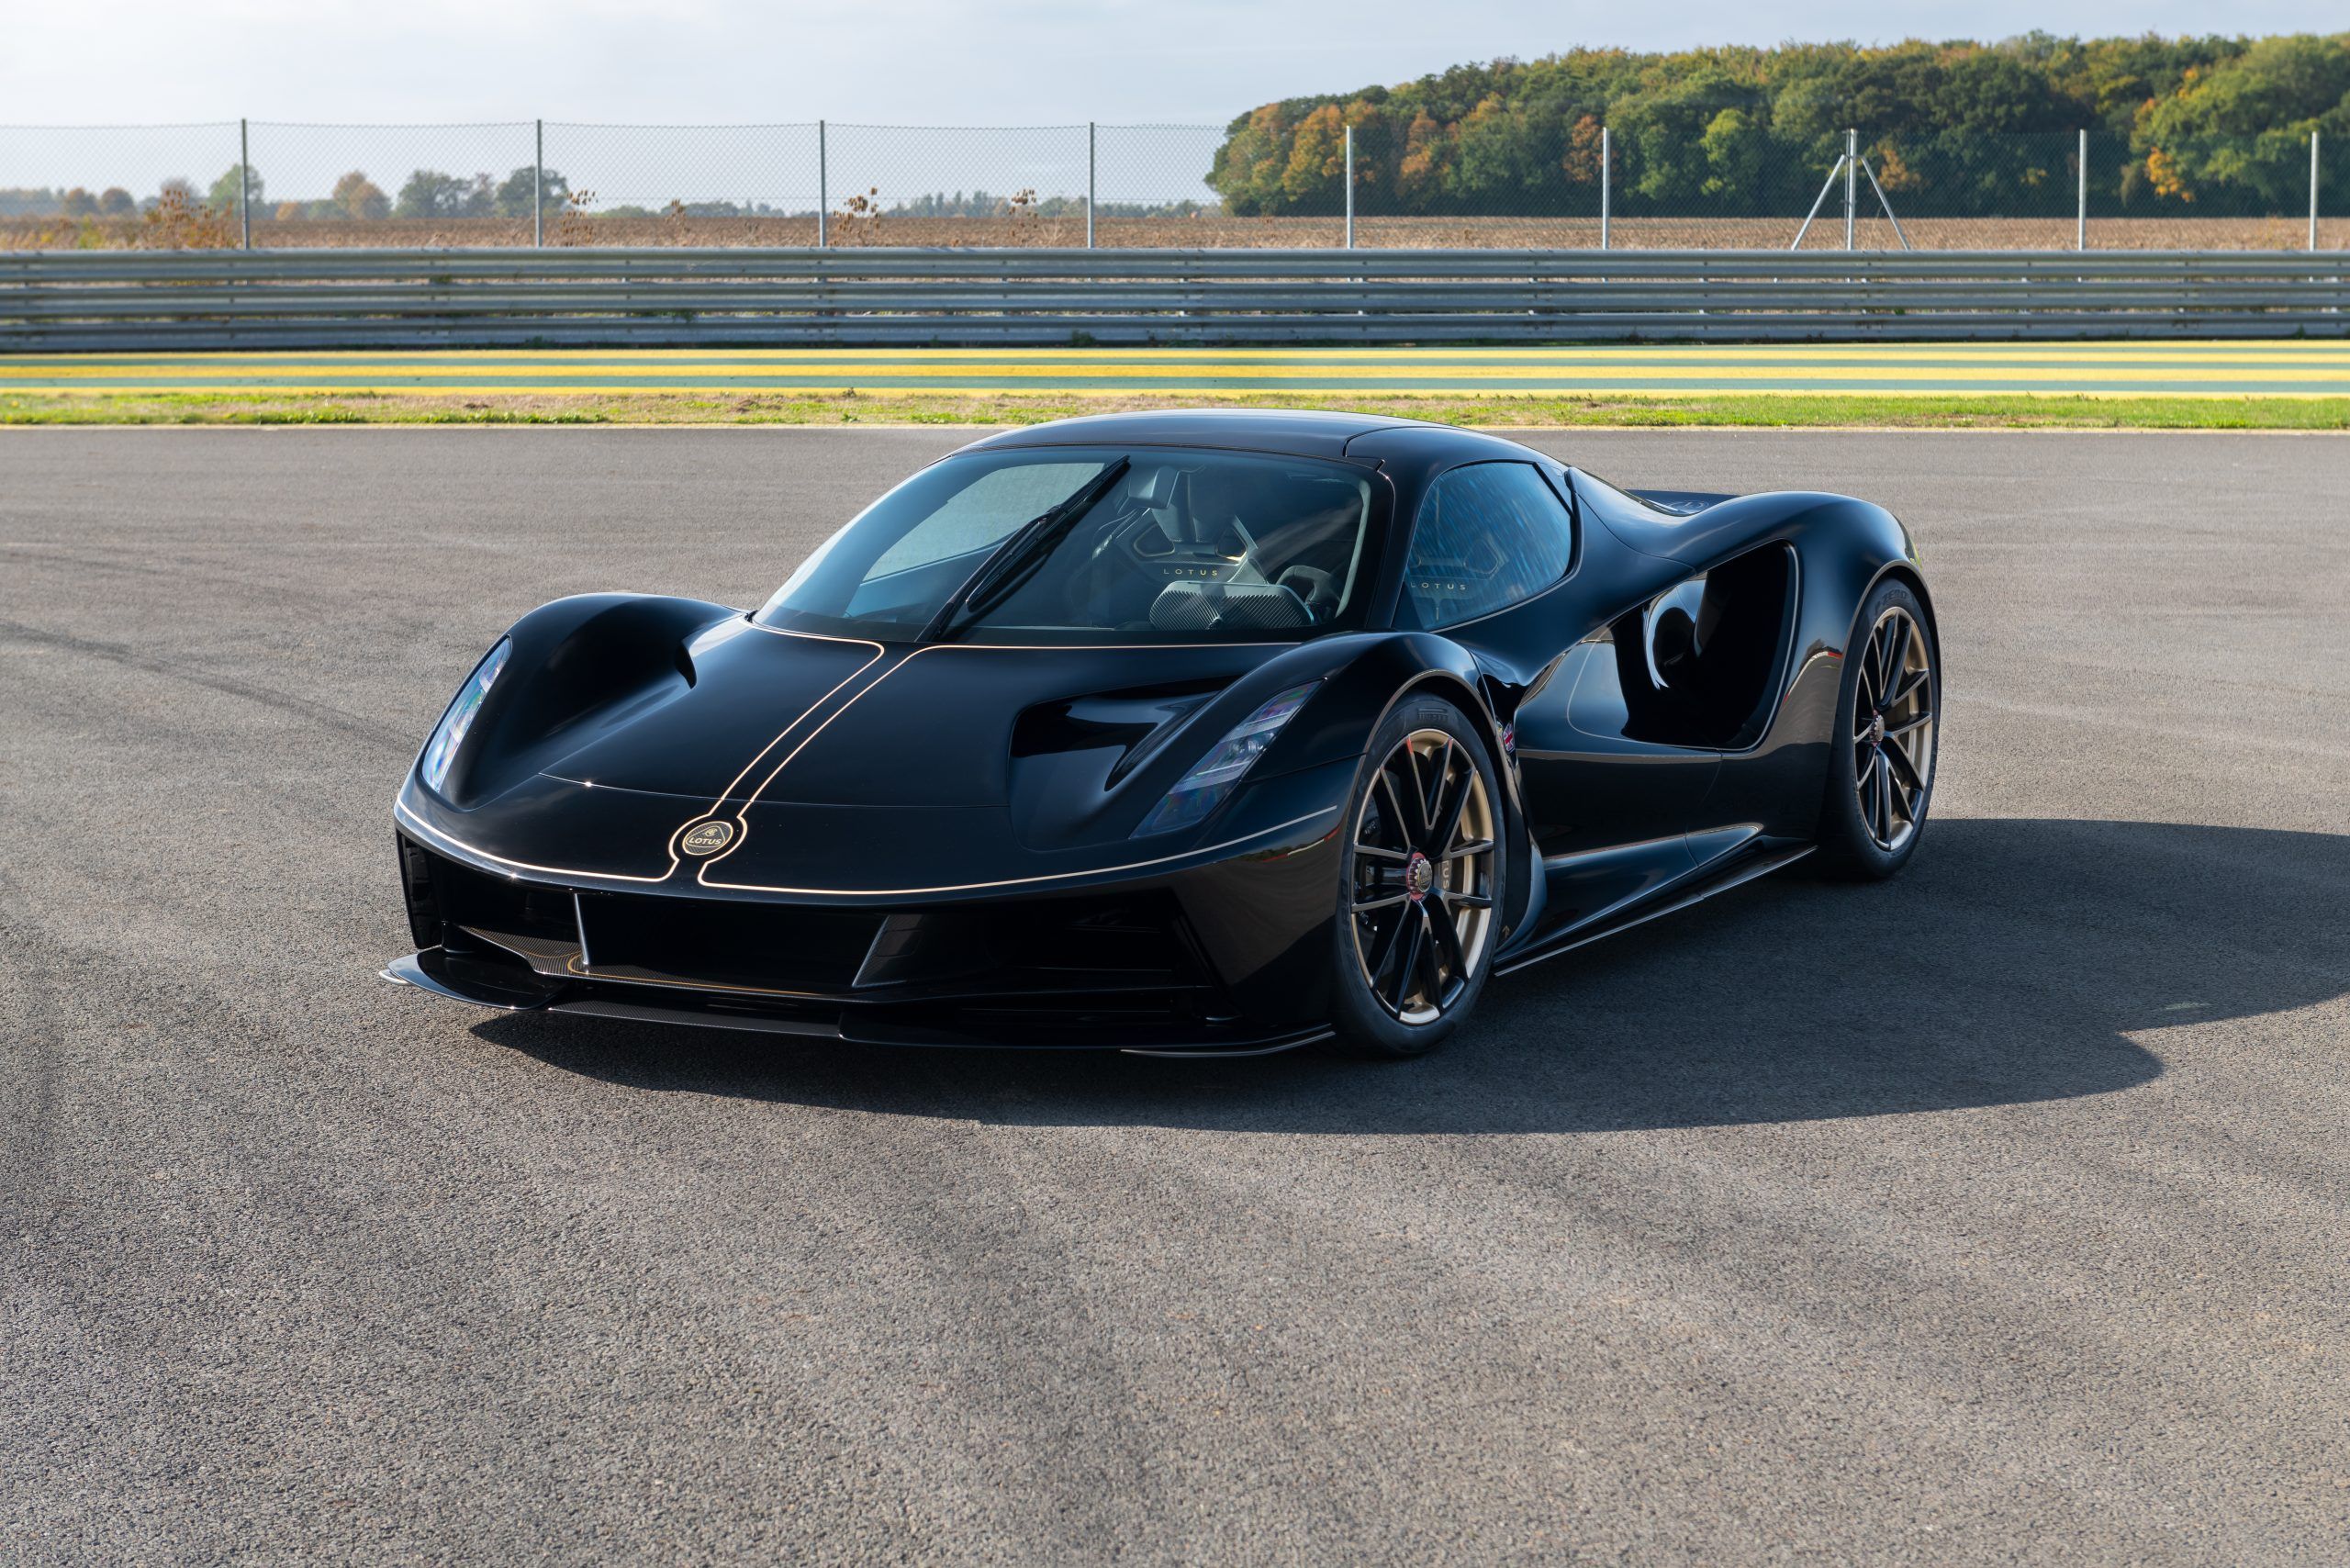 Lotus' Evija is now the world's most powerful production car